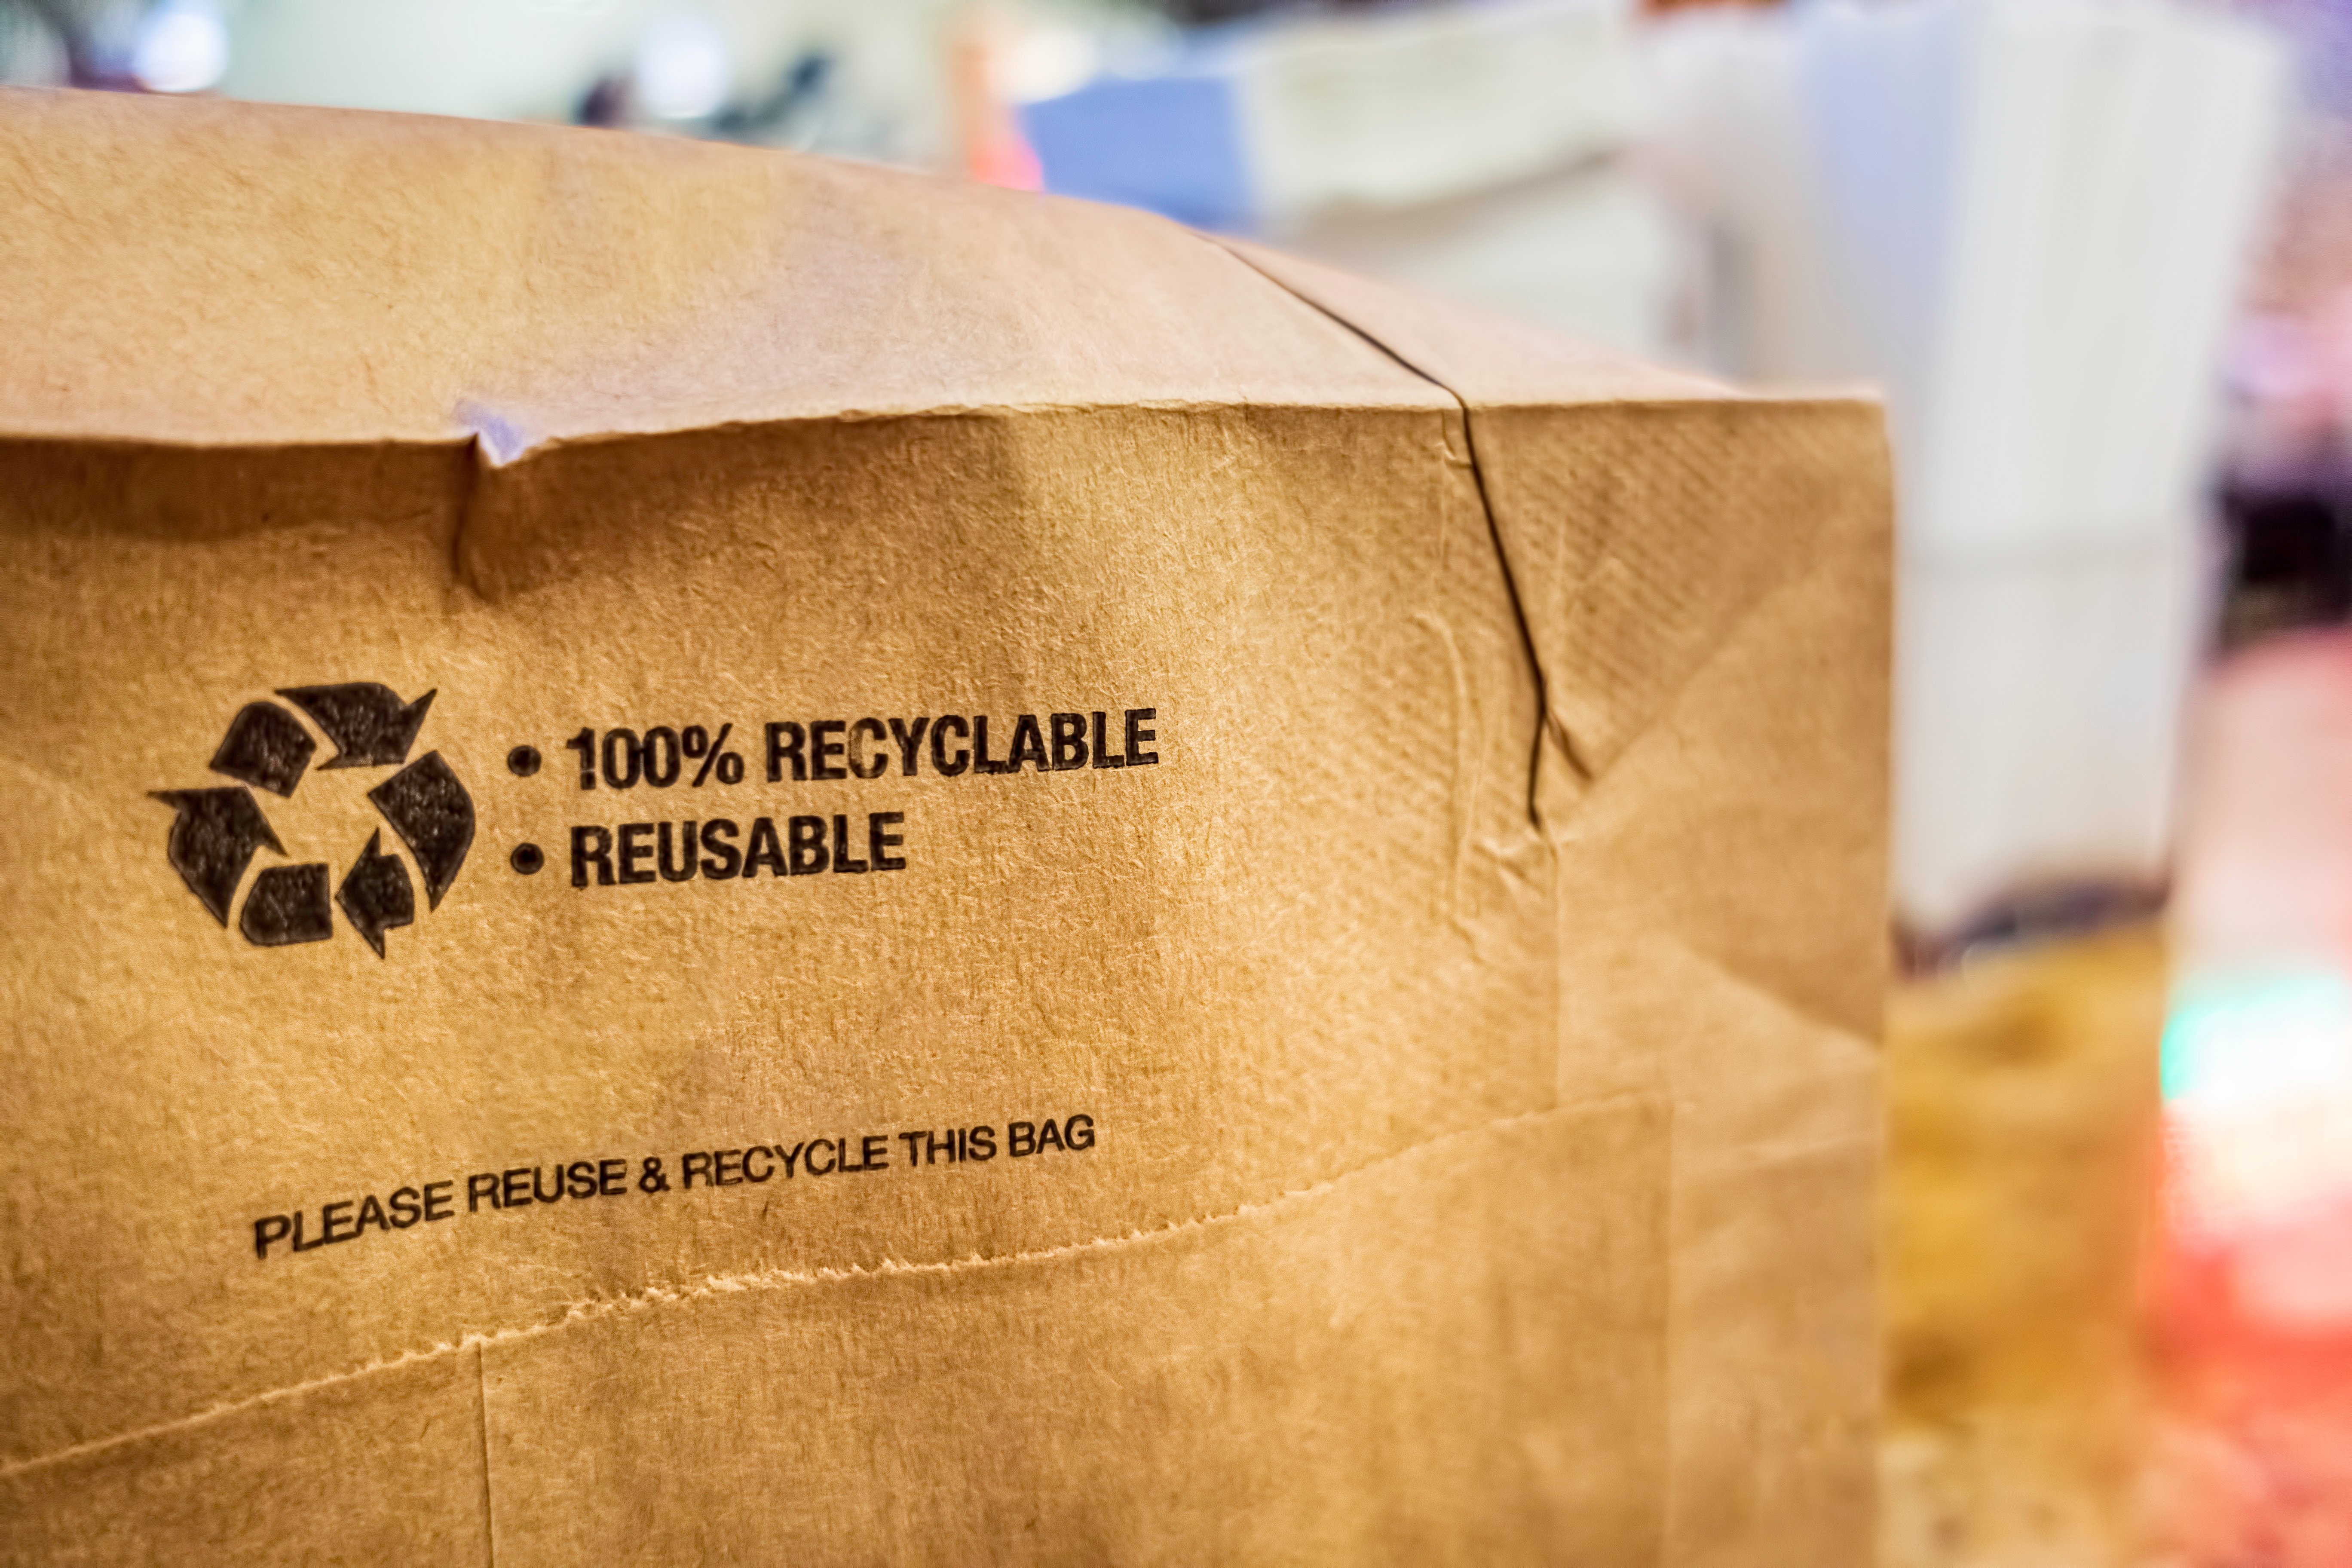 In My Opinion: Paper bags are essential to paper recycling